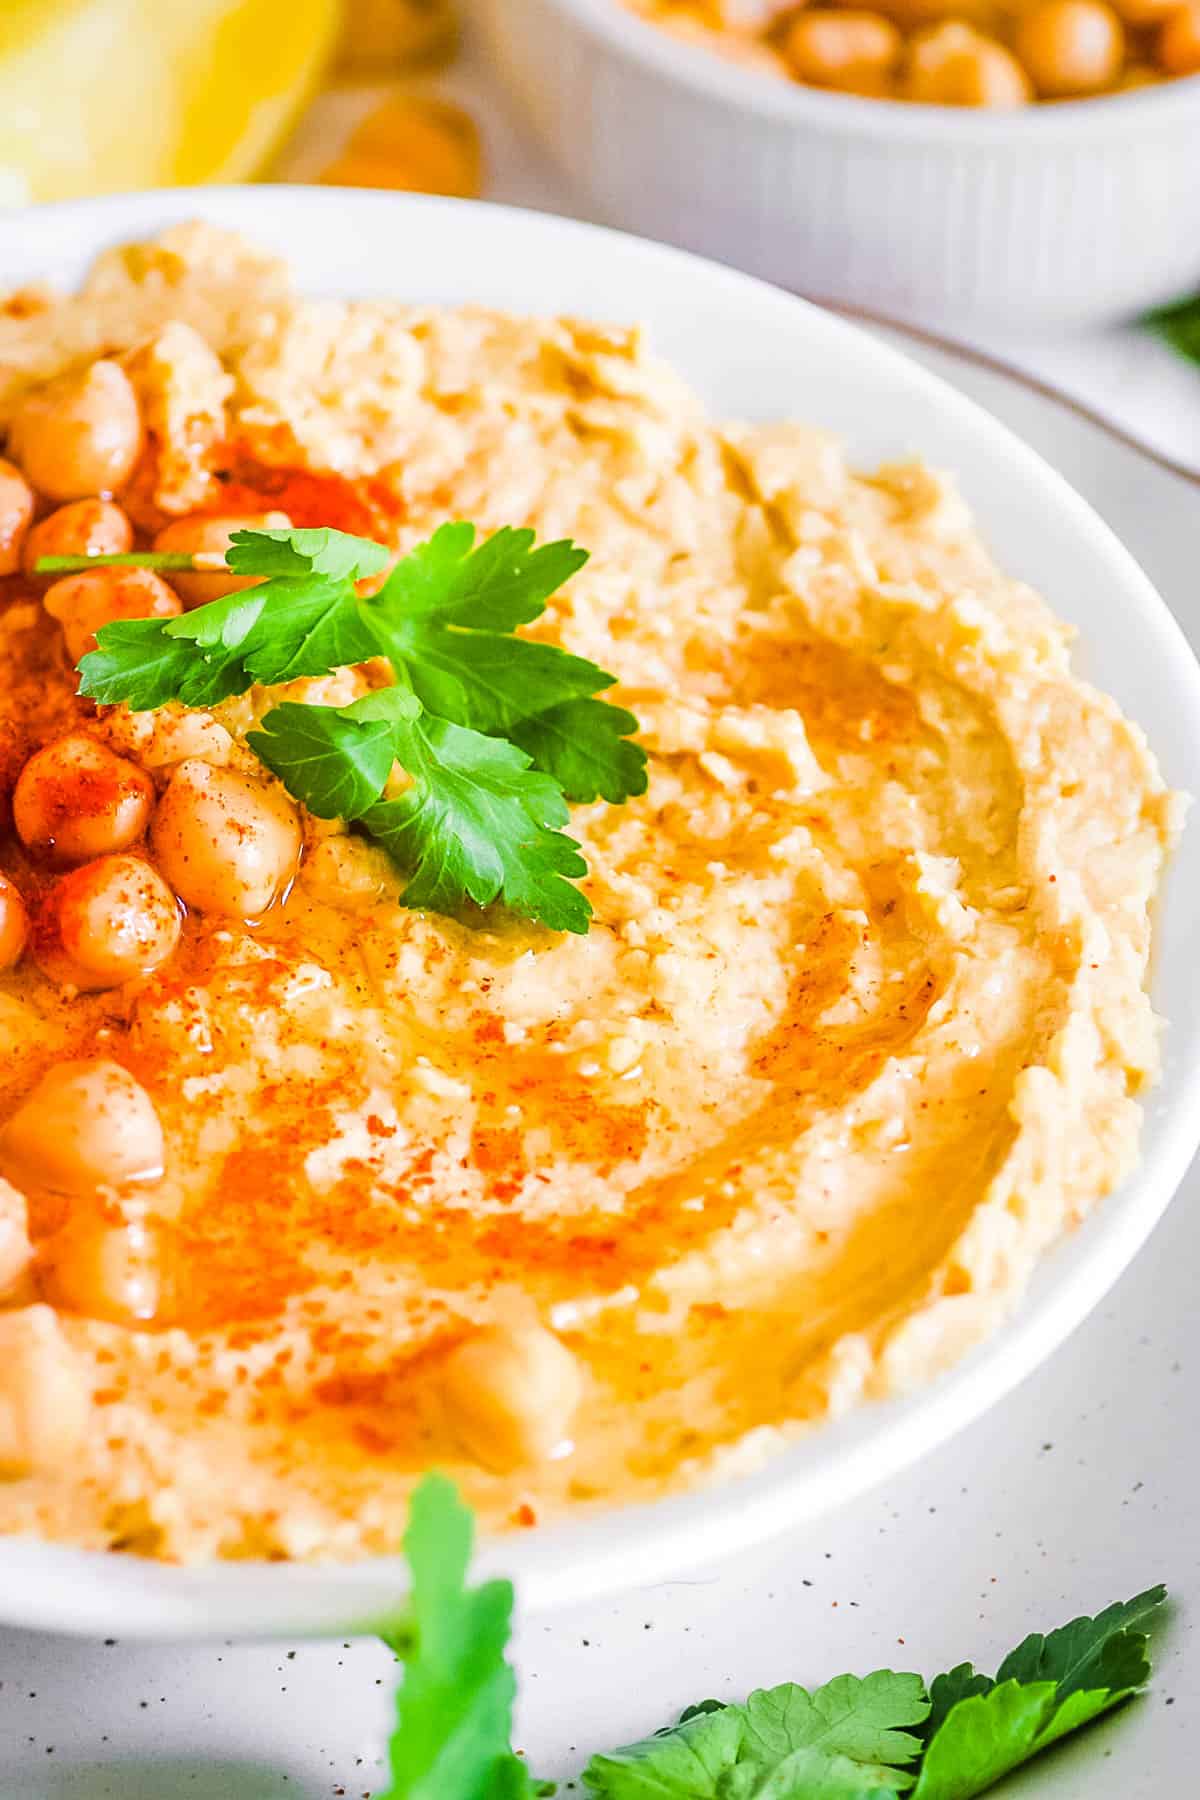 Hummus without garlic (no garlic hummus) in a white bowl garnished with parsley and paprika.